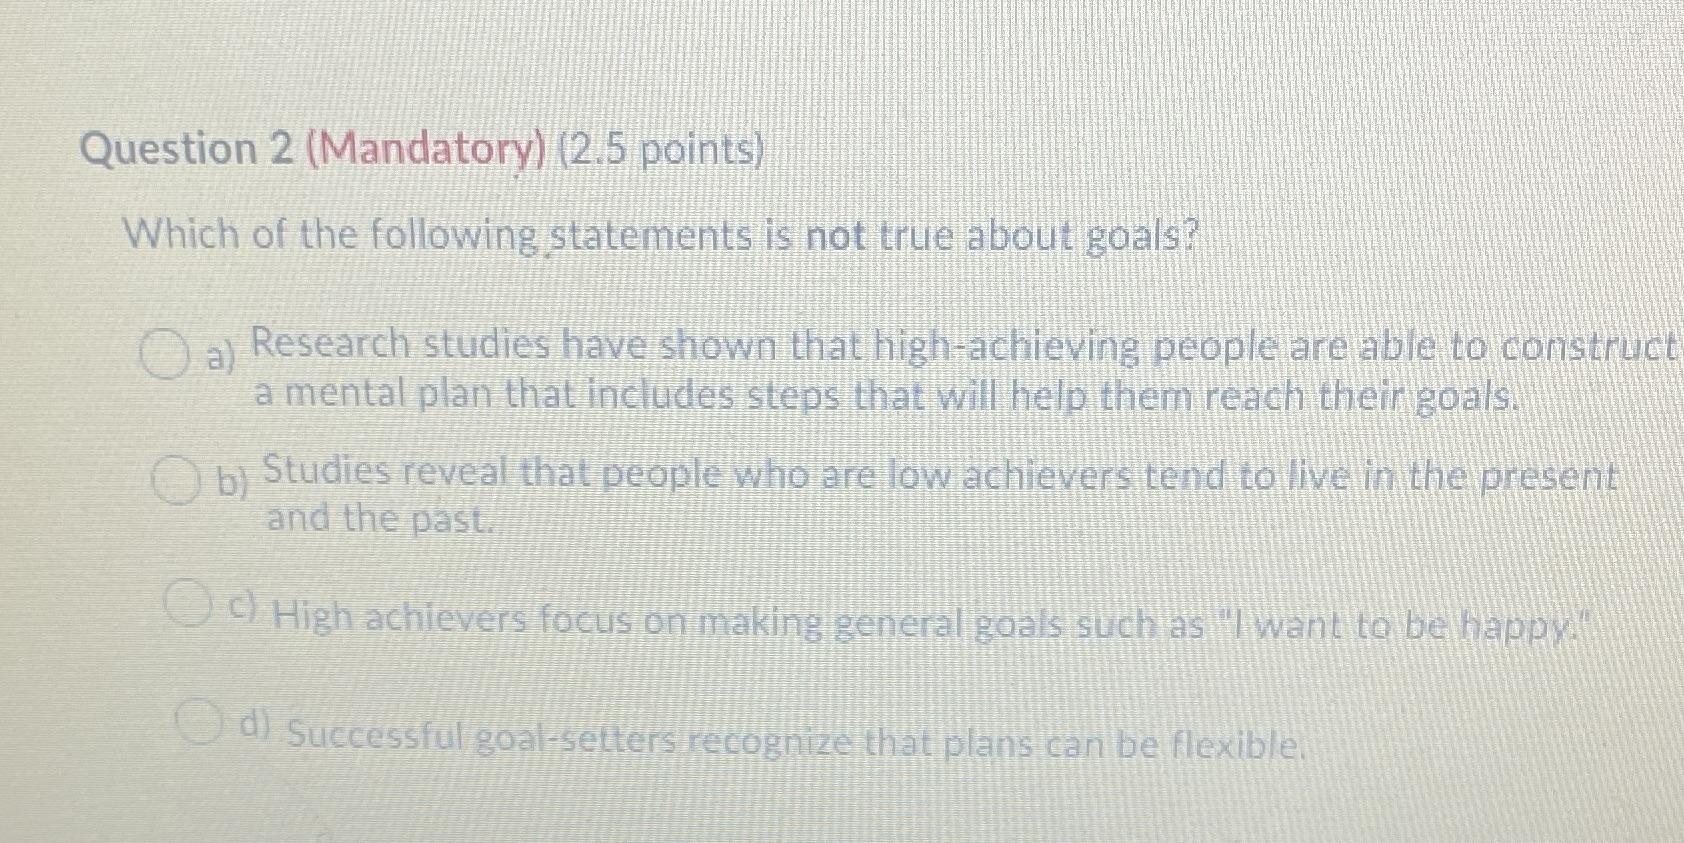 Question 2 (Mandatory) (2.5 points)Which of the following statements is not true about goals?()a) Research studies have shown that high-achieving people are able to constructa mental plan that includes steps that will help them reach their goals.()b) Studies reveal that people who are low achievers tend to live in the presentand the past.